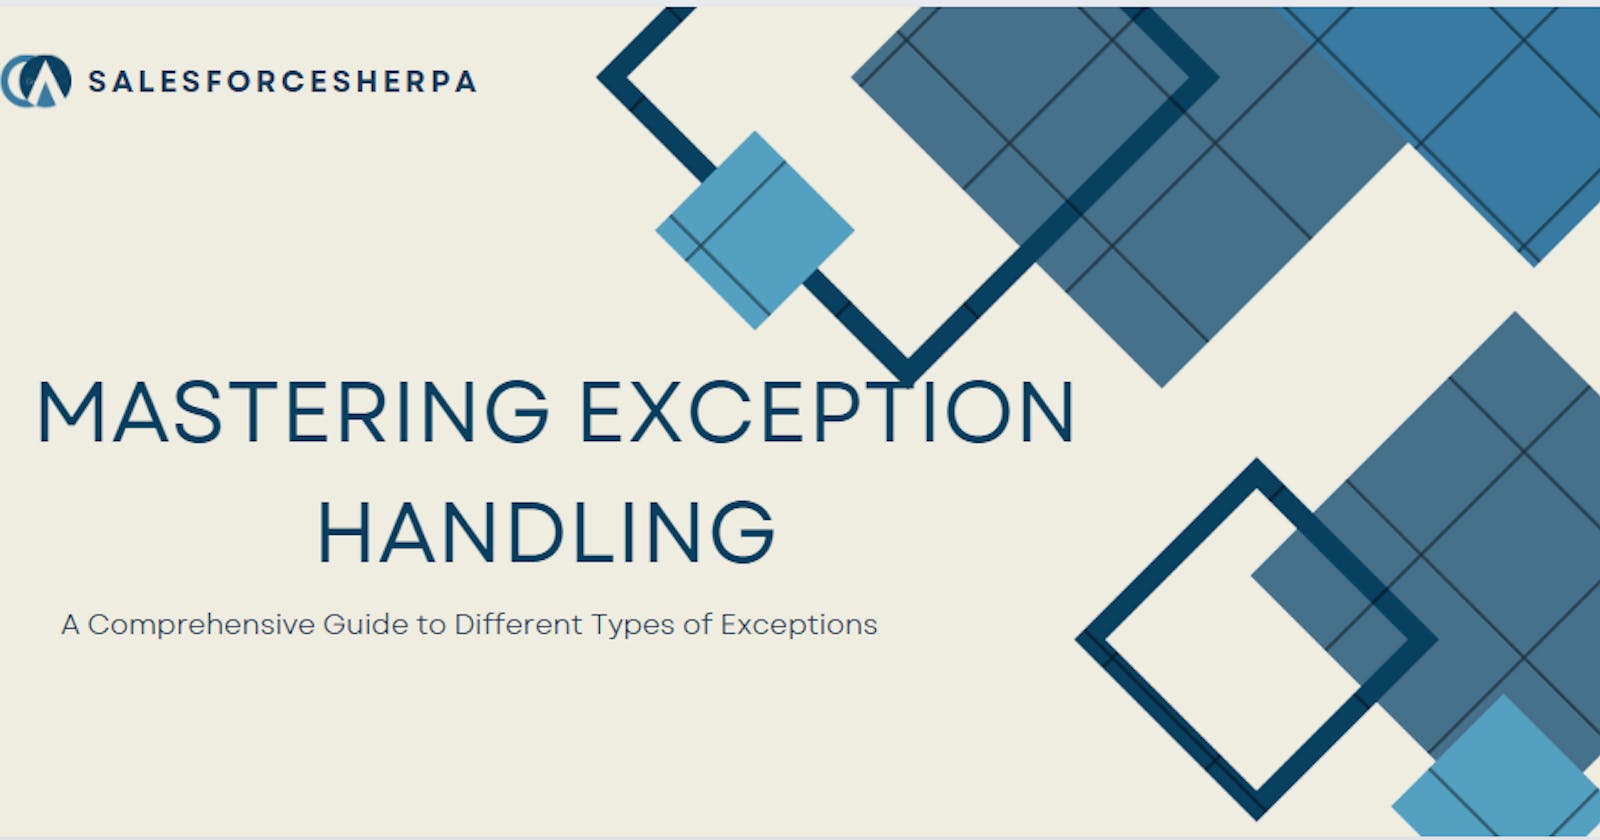 Mastering Exception Handling in Salesforce - A Comprehensive Guide to Different Types of Exceptions